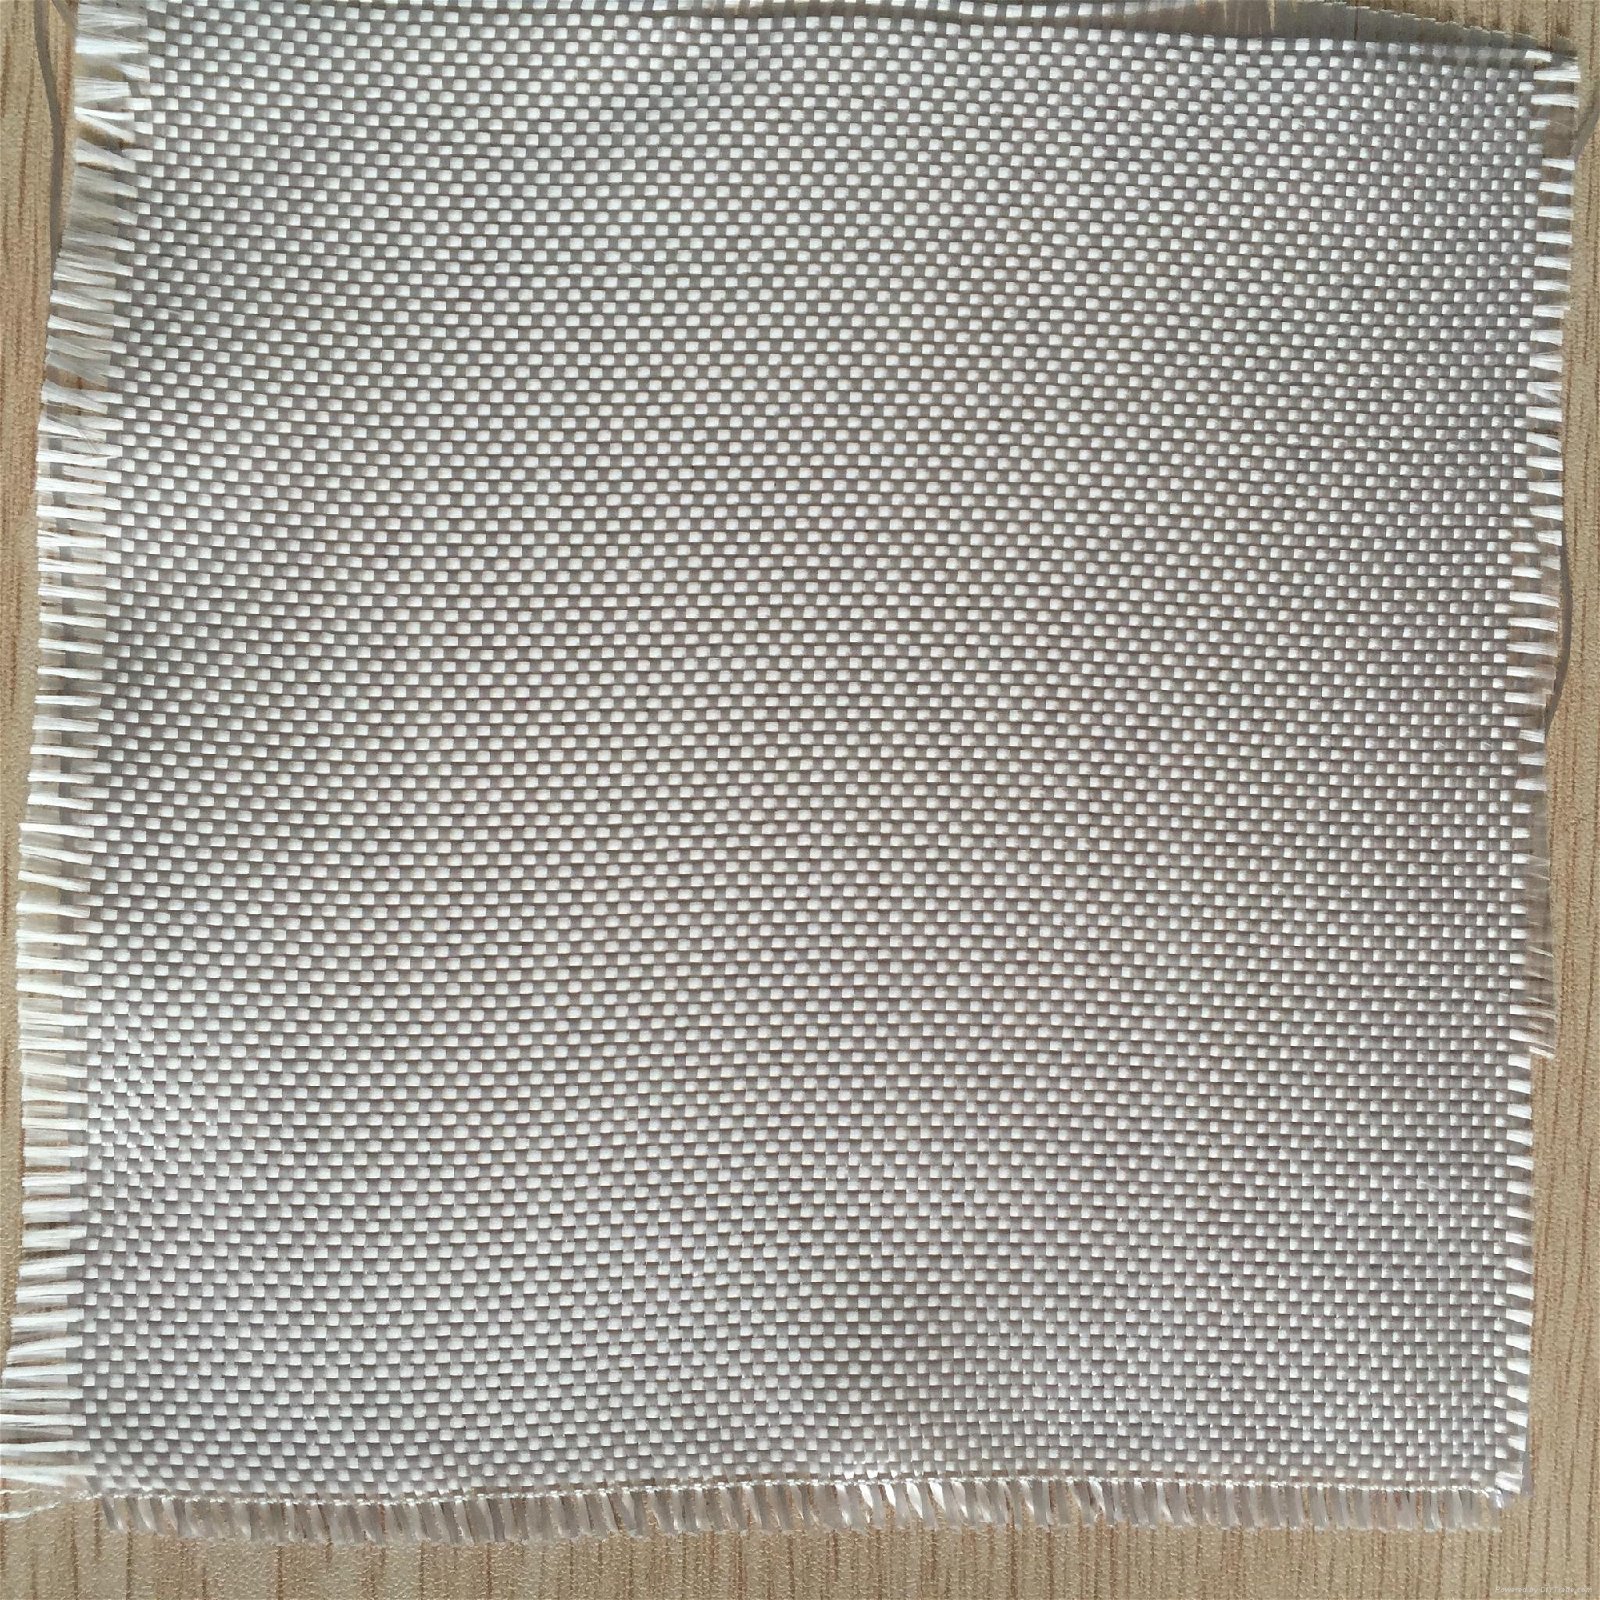 industrial polyester flat woven base fabric for pvc tarpaulin 1000D/500D